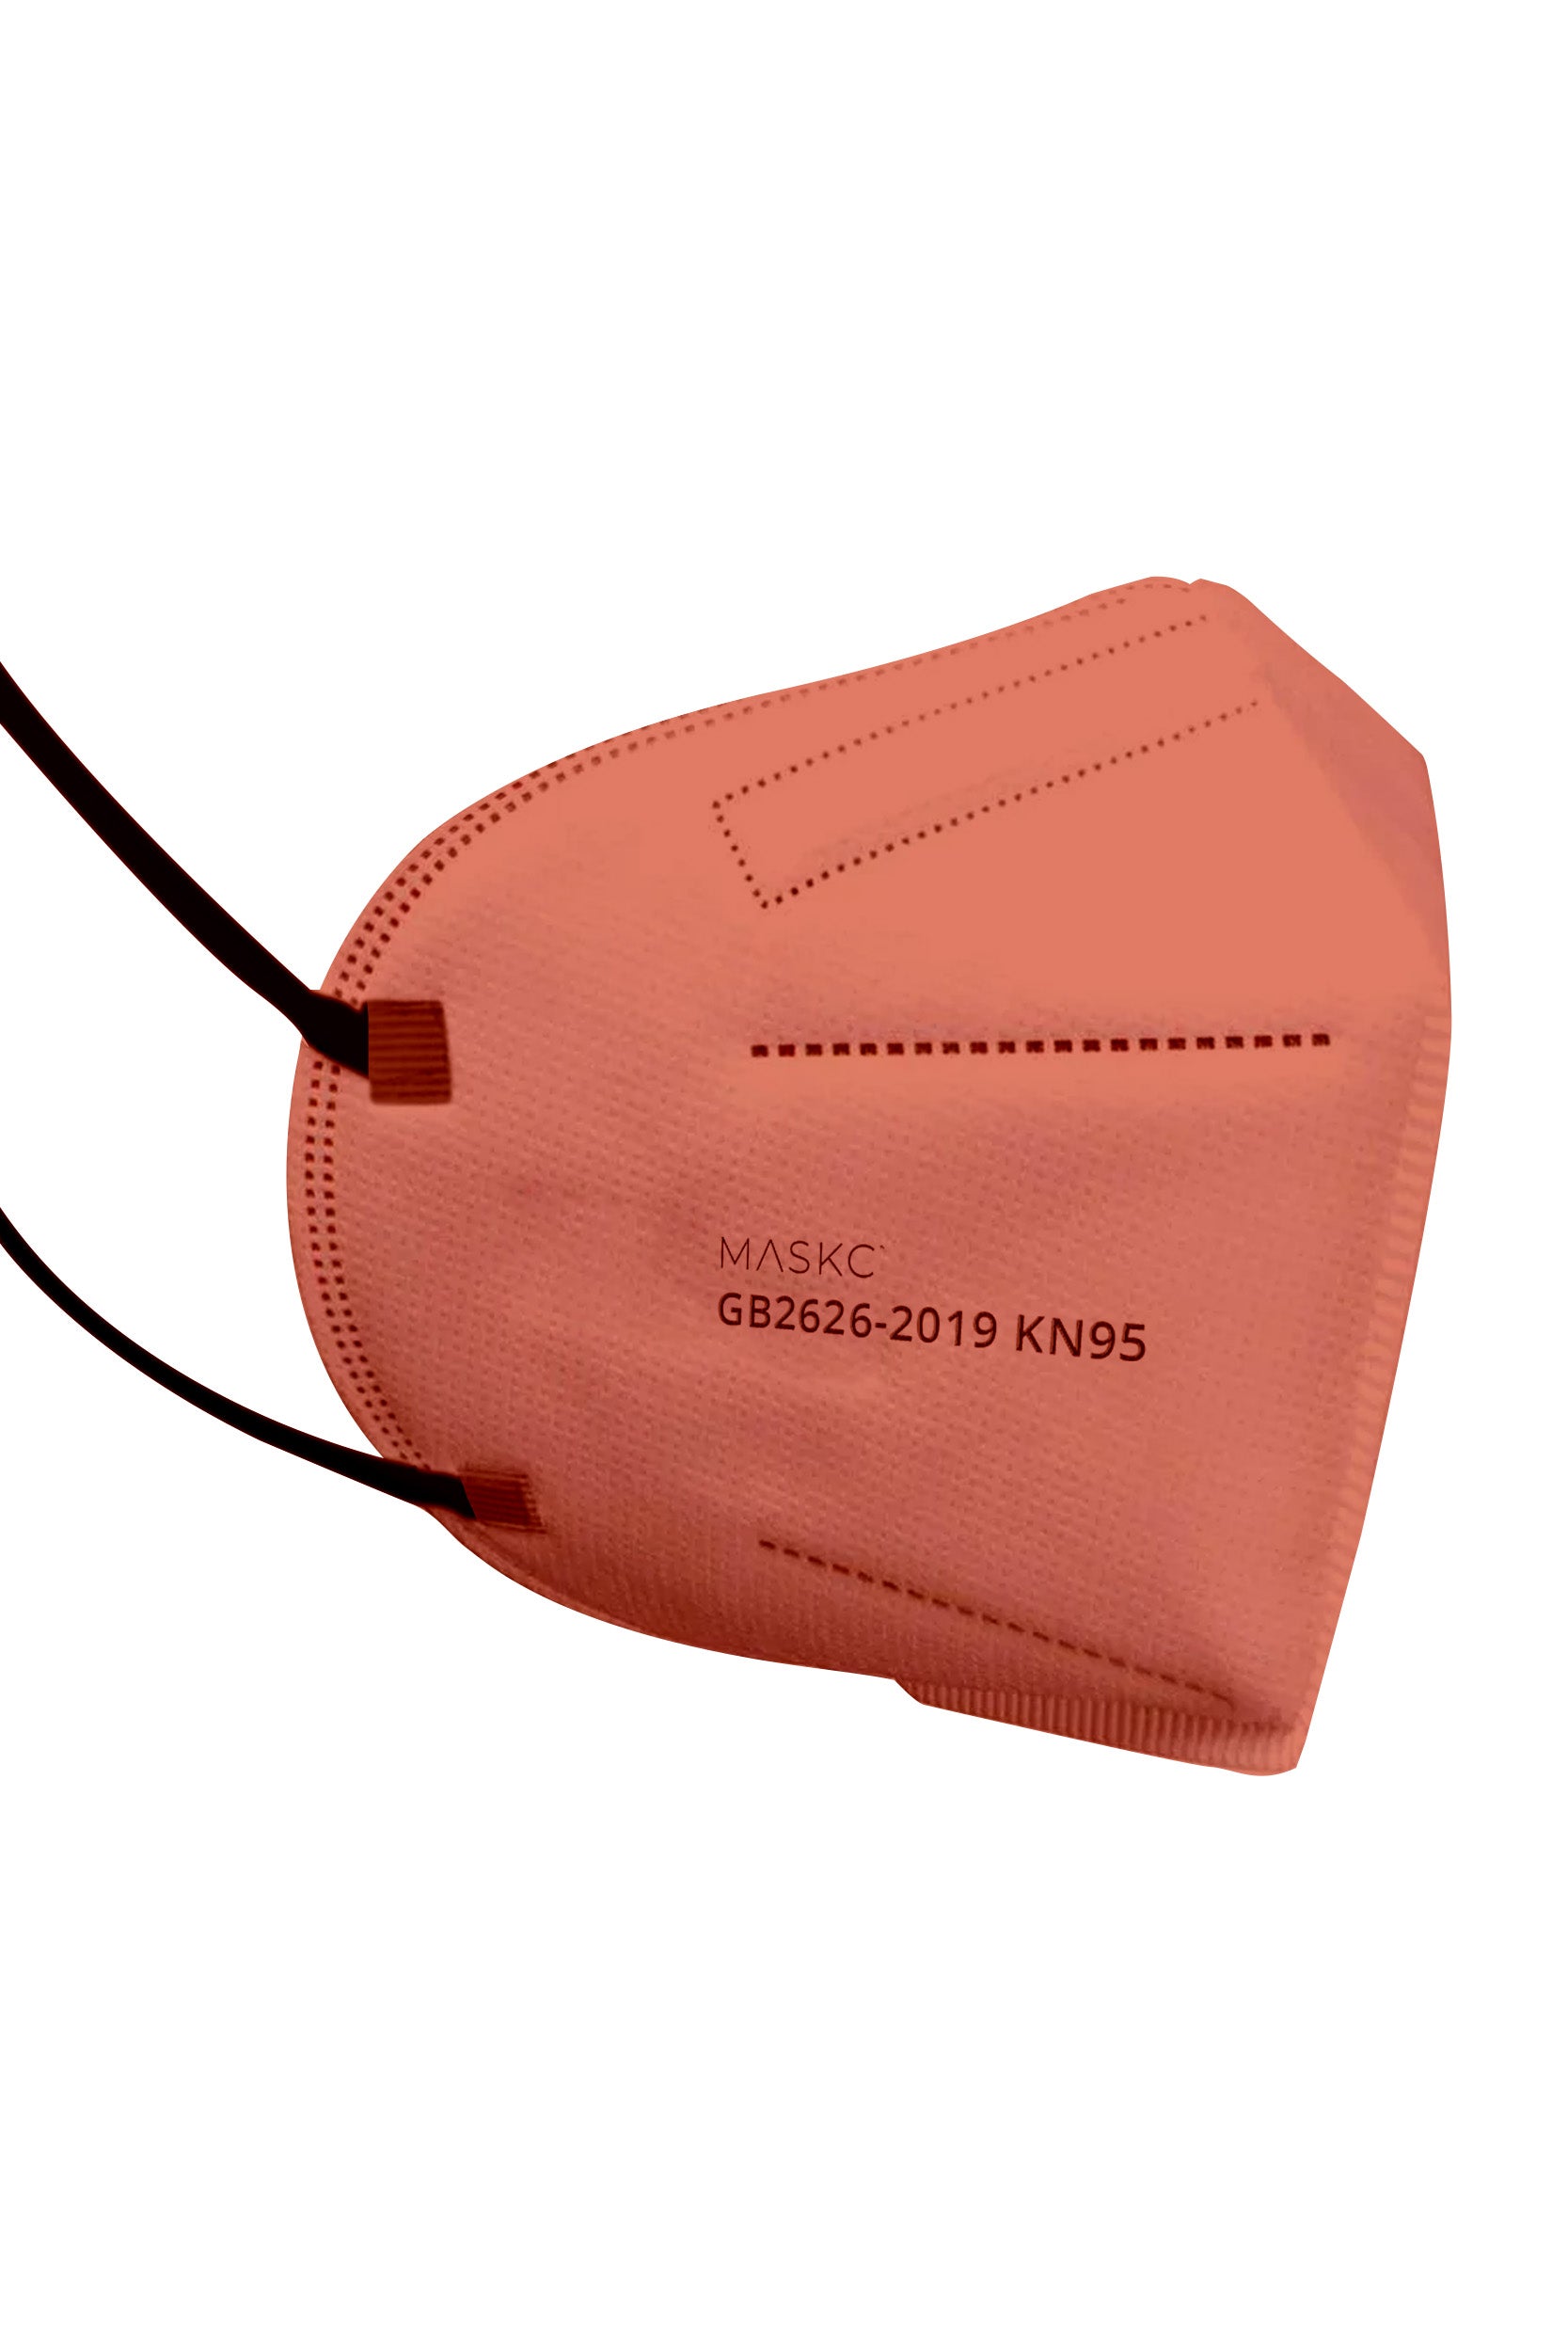 Stylish dark red KN95 face mask, with soft black ear loops and high quality fabric. 